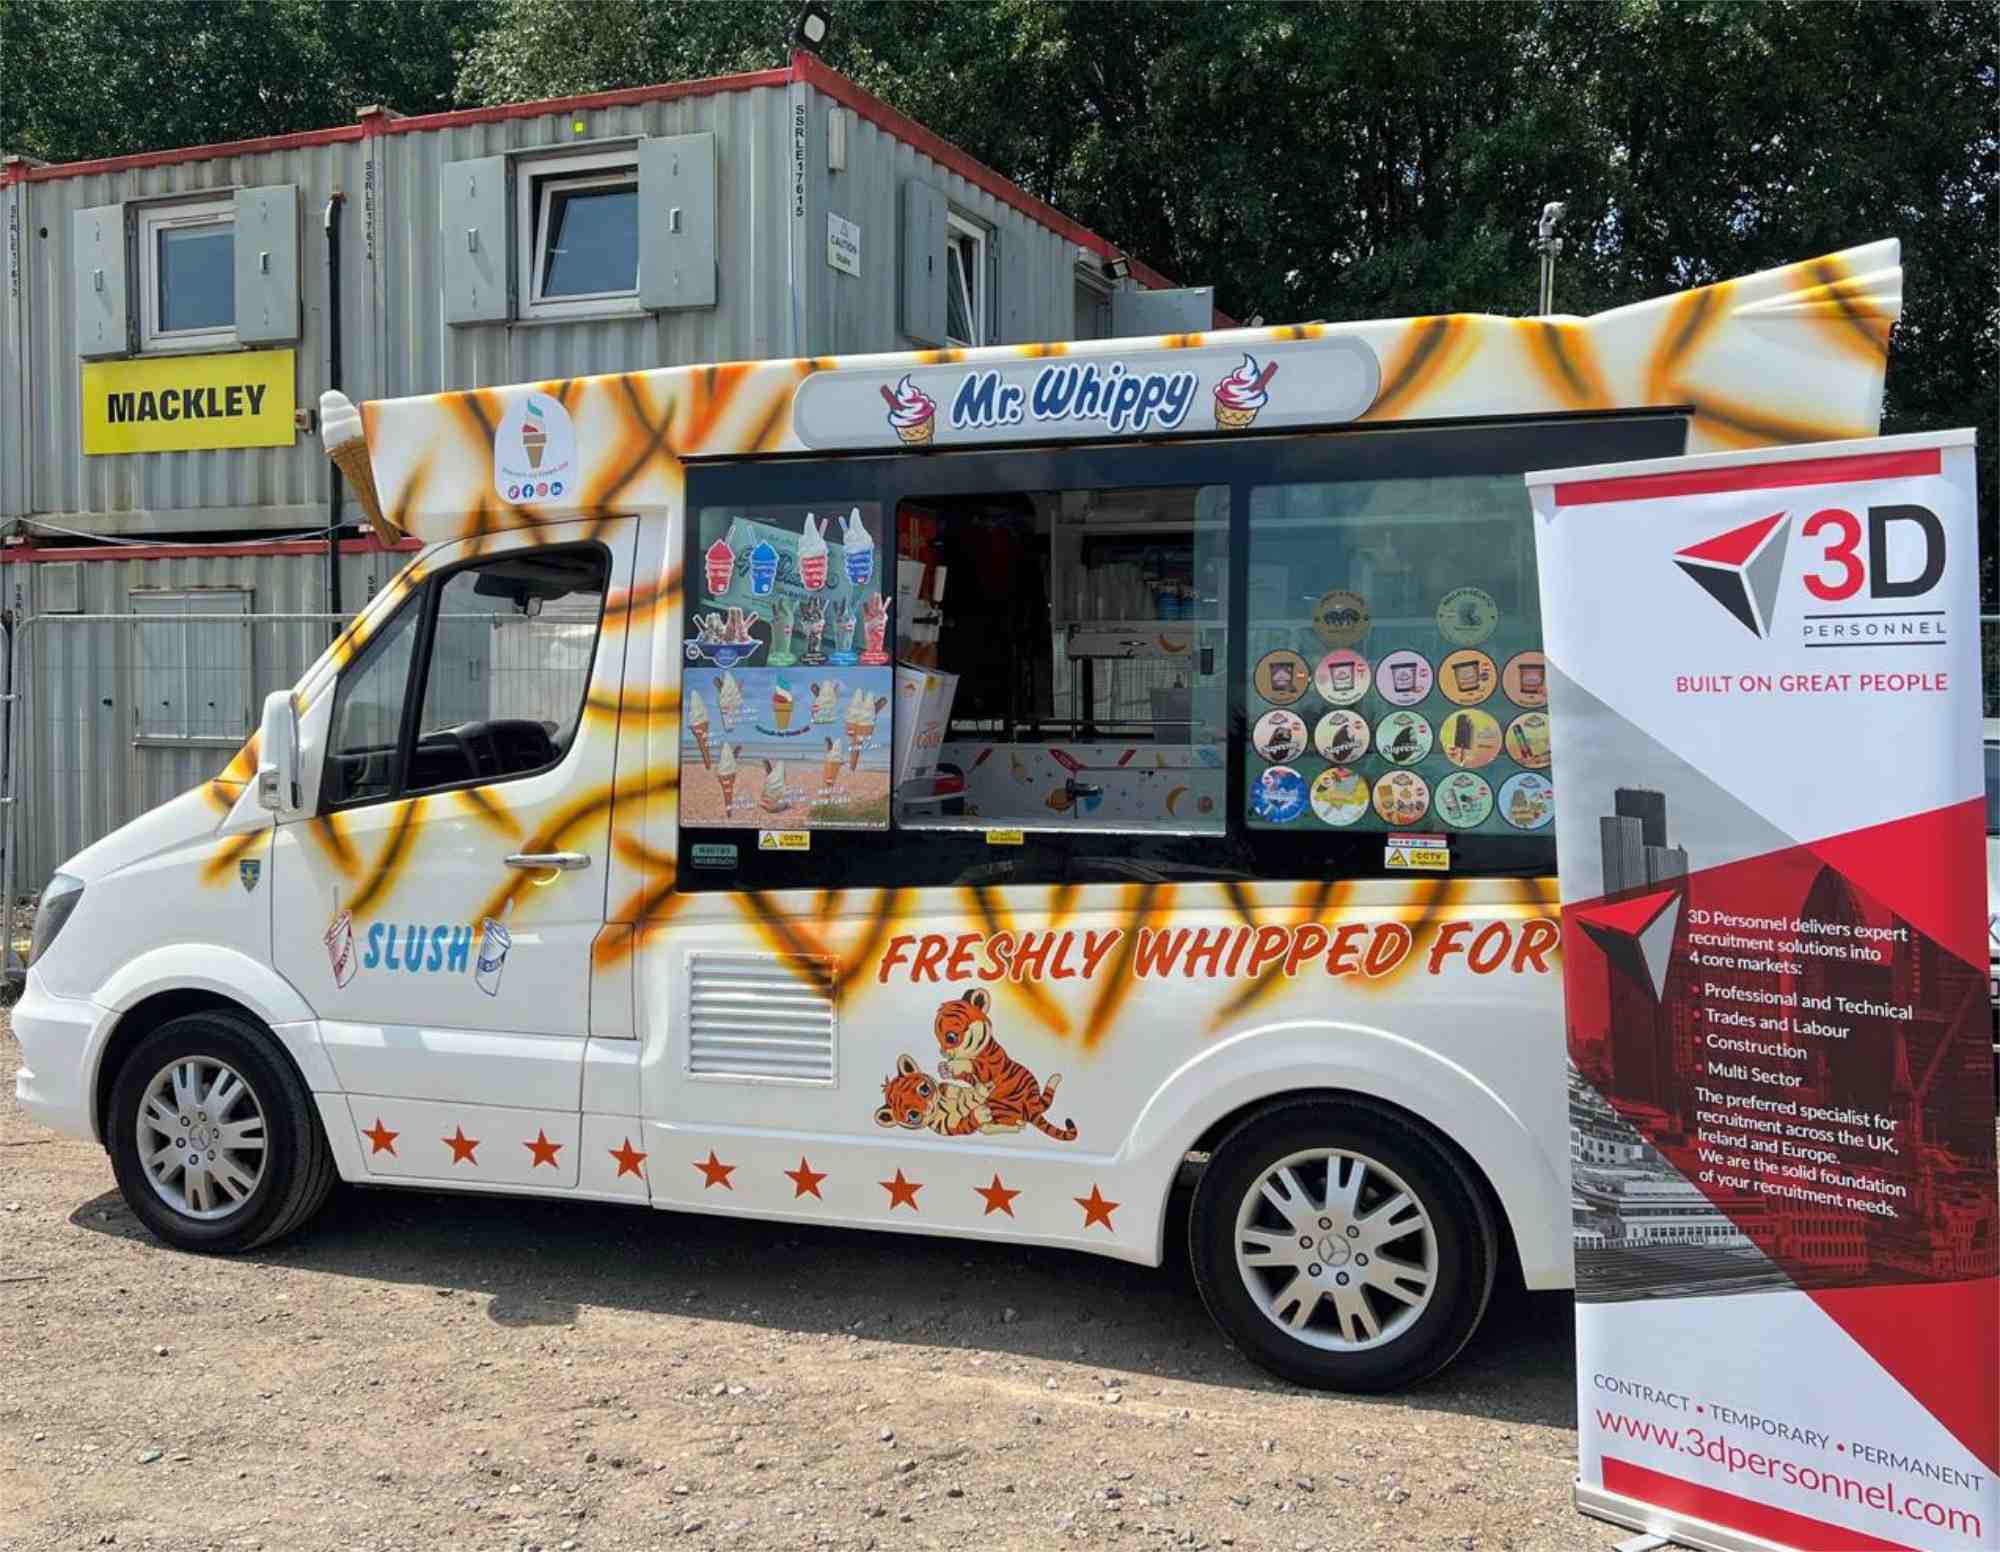 Mr Whippy's van is open for business